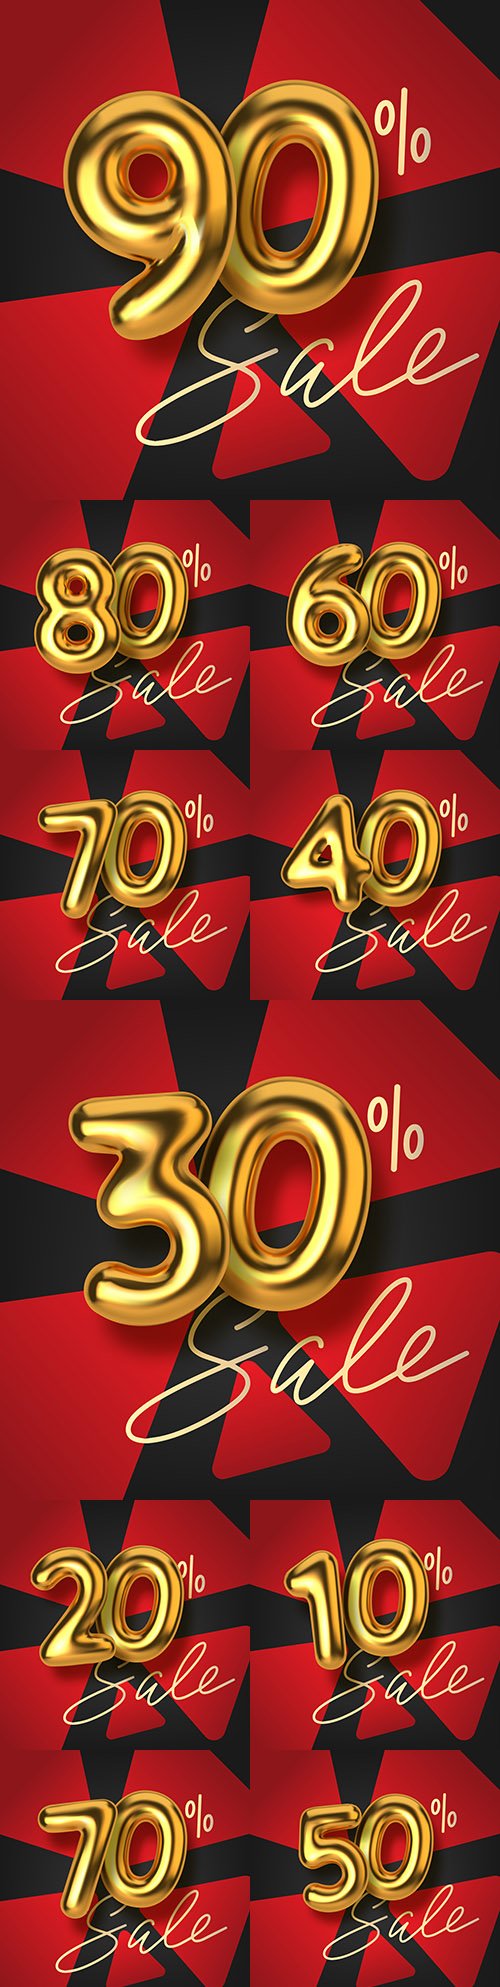 Promotion discount from realistic 3d gold text balloons